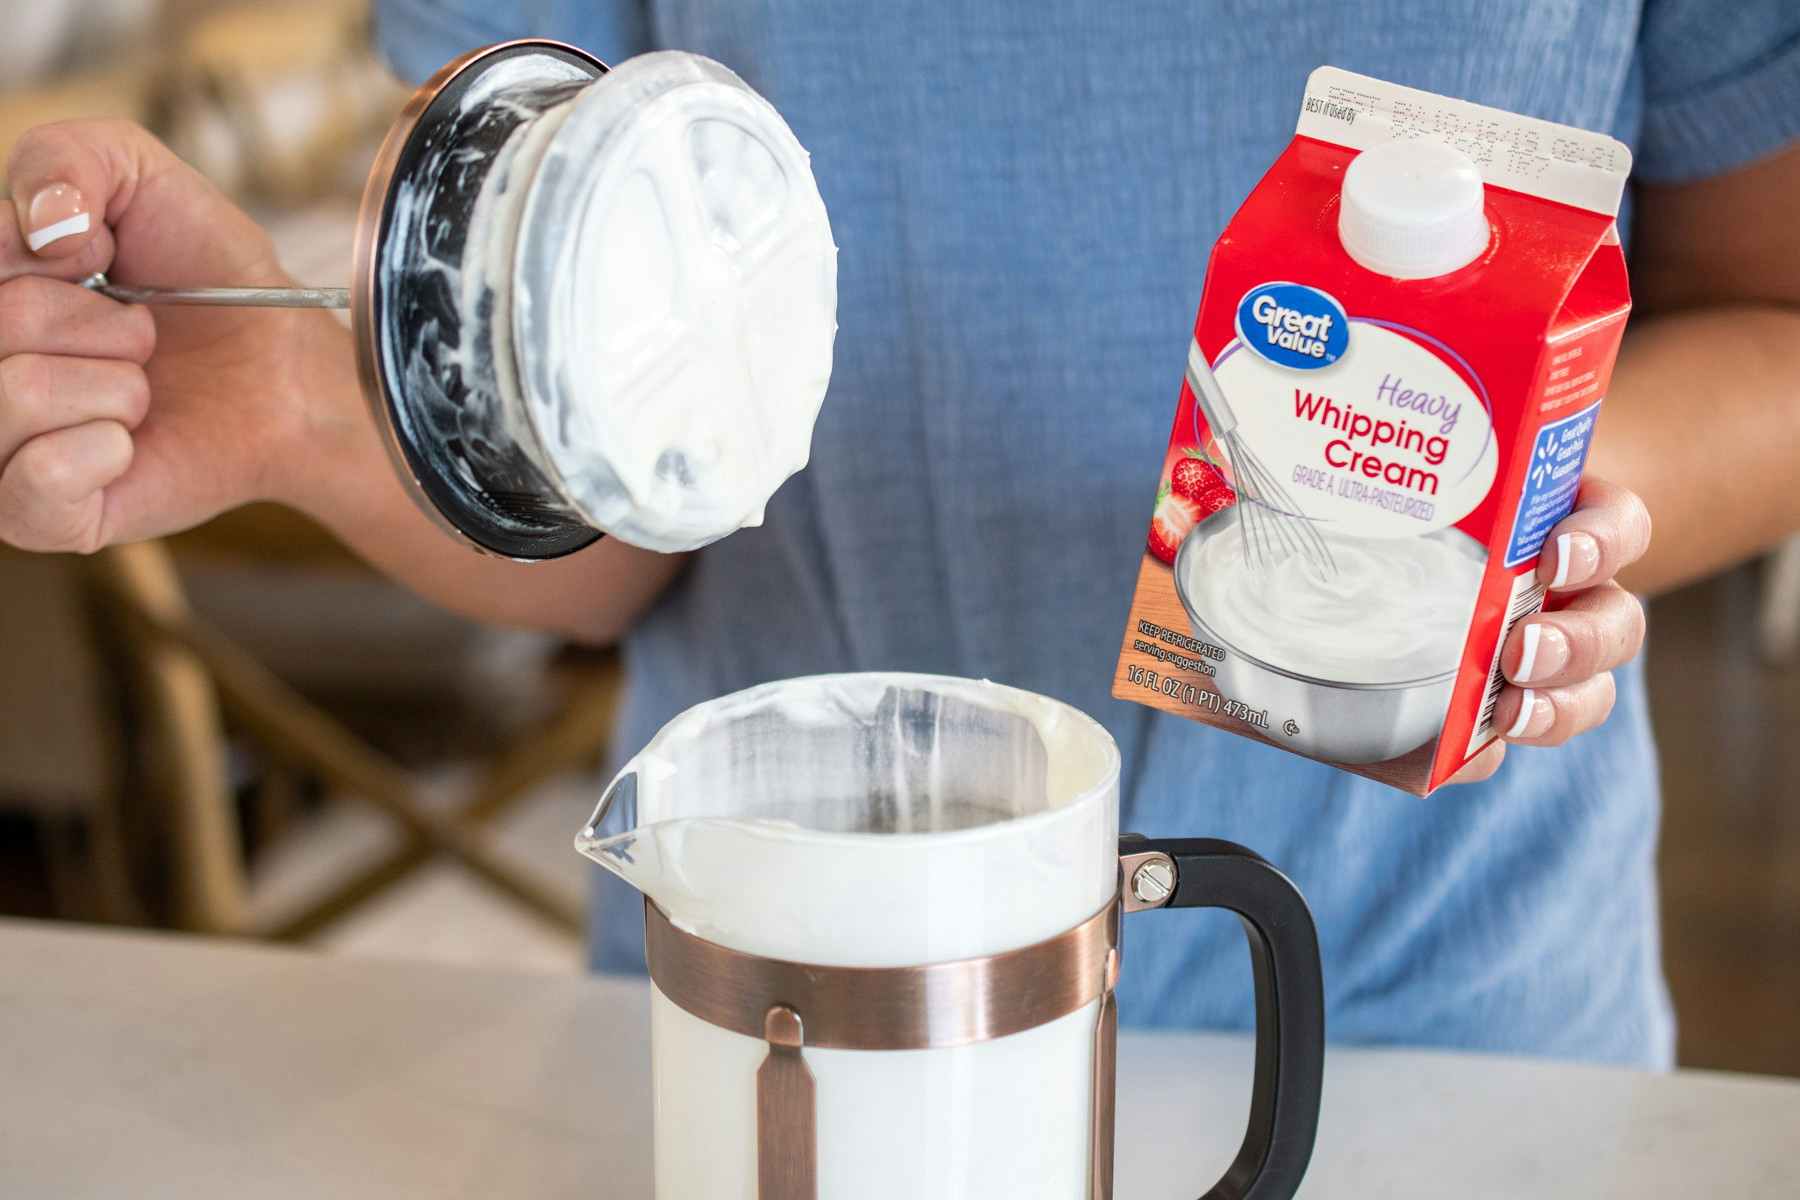 How to Use a French Press - Fit Foodie Finds